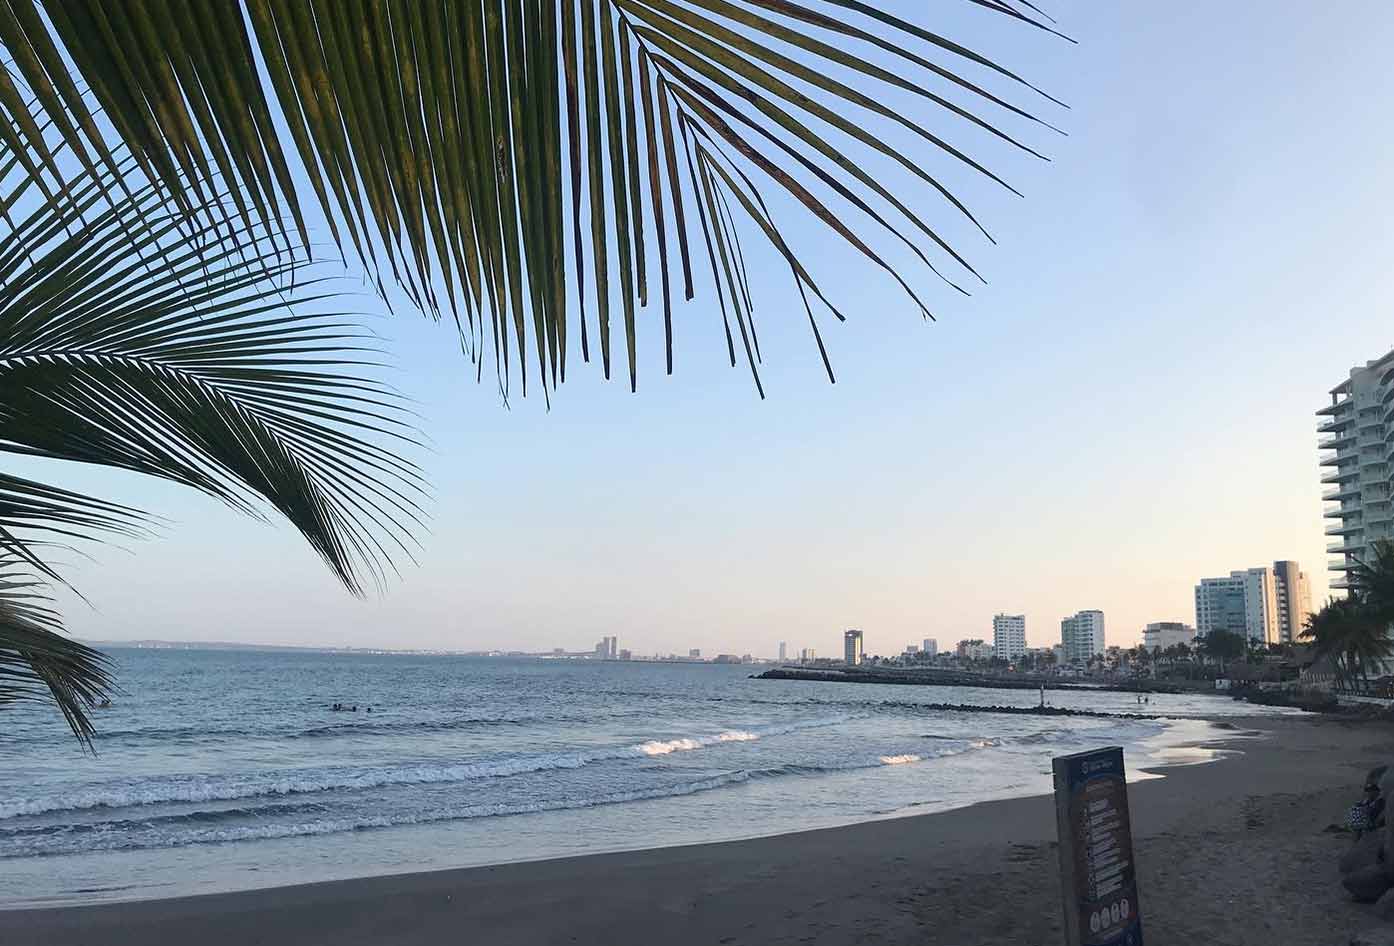 Veracruz Best Beaches - Dive In To The Waves Of The Most Spanish City In Mexico